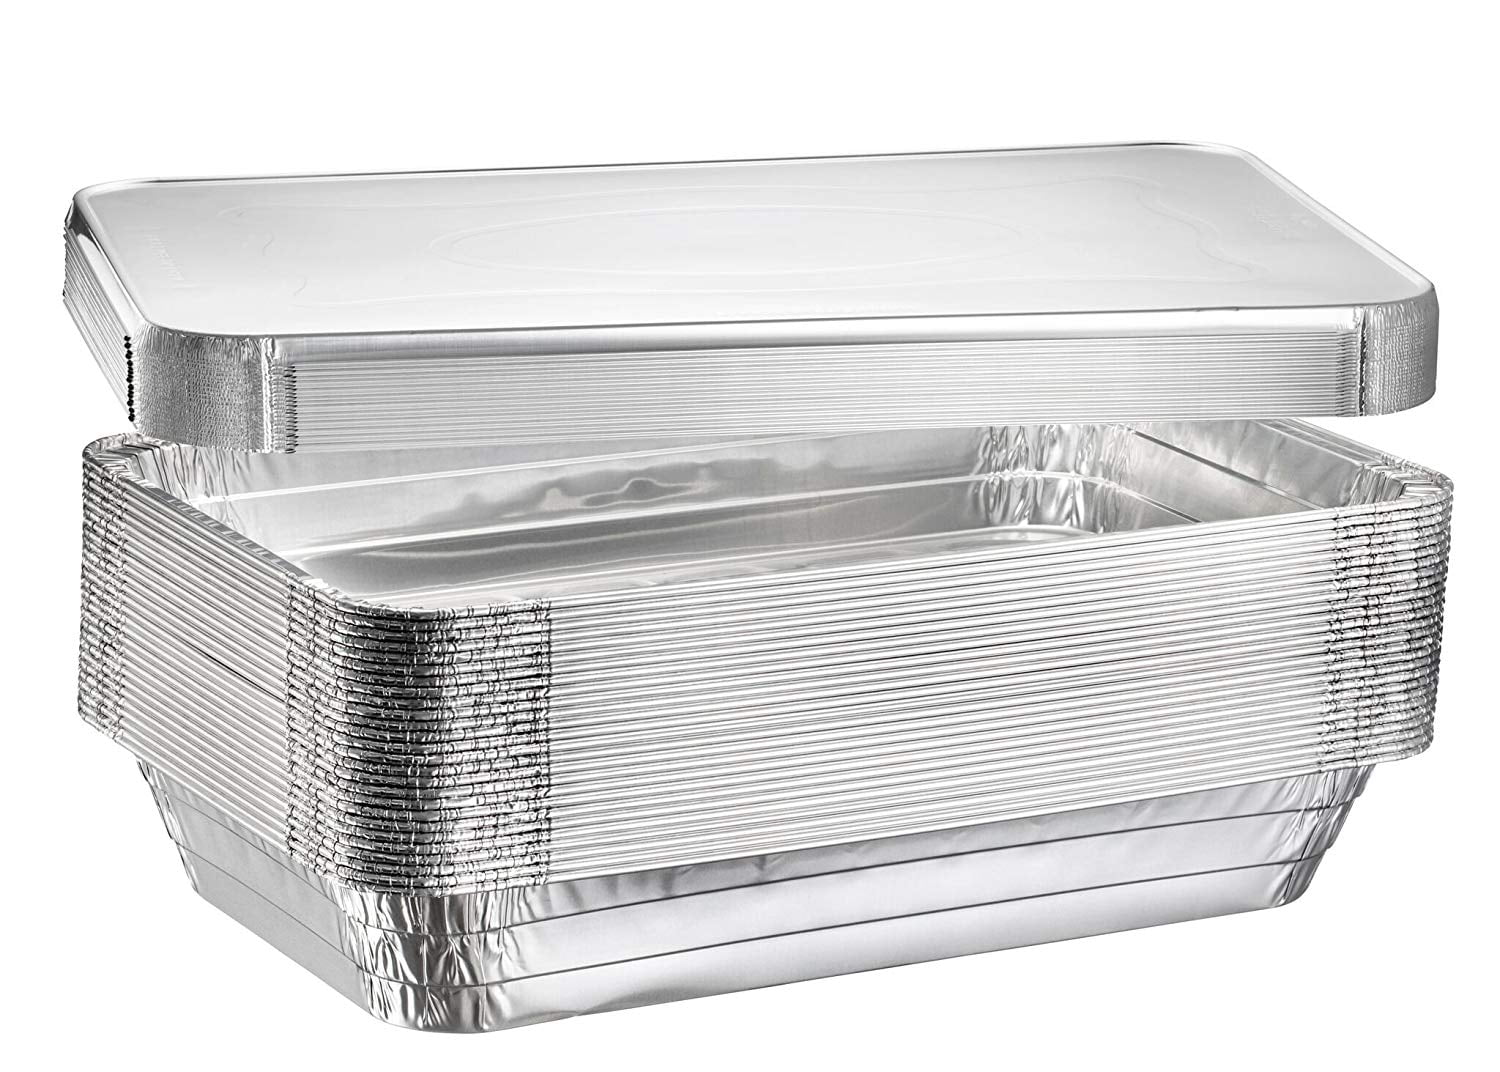 Half Size Roasting Pans 10 x 13 by Spare Essentials Disposable Aluminum Foil Steam Table Deep Pans 35 Pack Durable Chafing Pans with Lids Buffet Pans Size LIDS INCLUDED